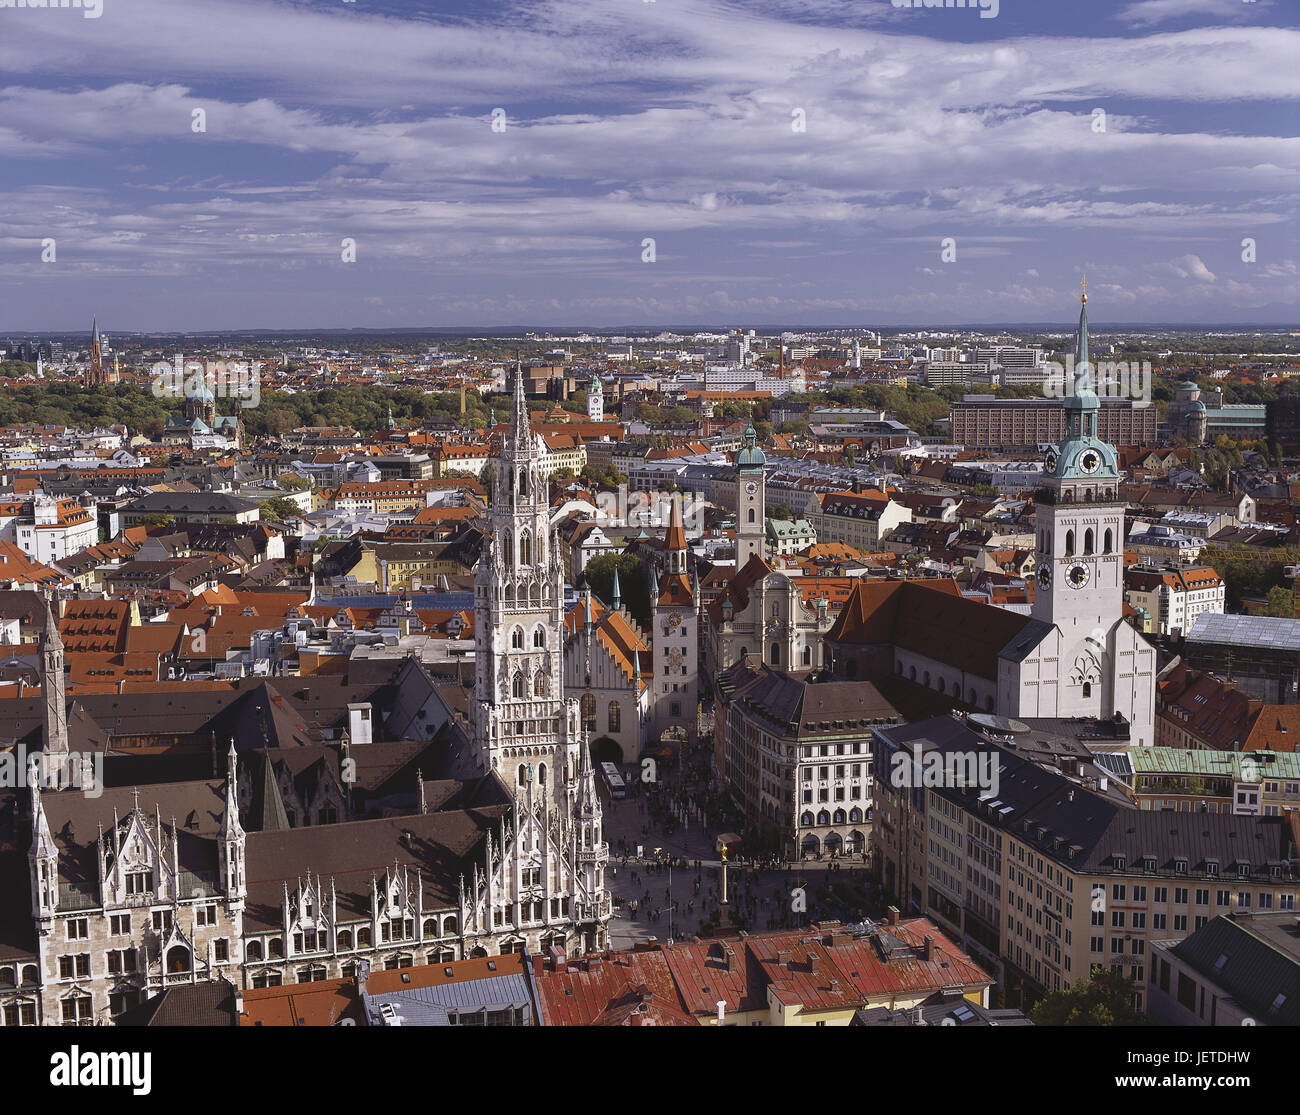 Germany, Bavaria, Munich, town overview, city hall tower, parish church Saint Peter, town, Old Town, city hall, towers, parish church, church, steeple, church, religion, faith, houses, view, overview, sunshine, sky, blue, clouds, Stock Photo